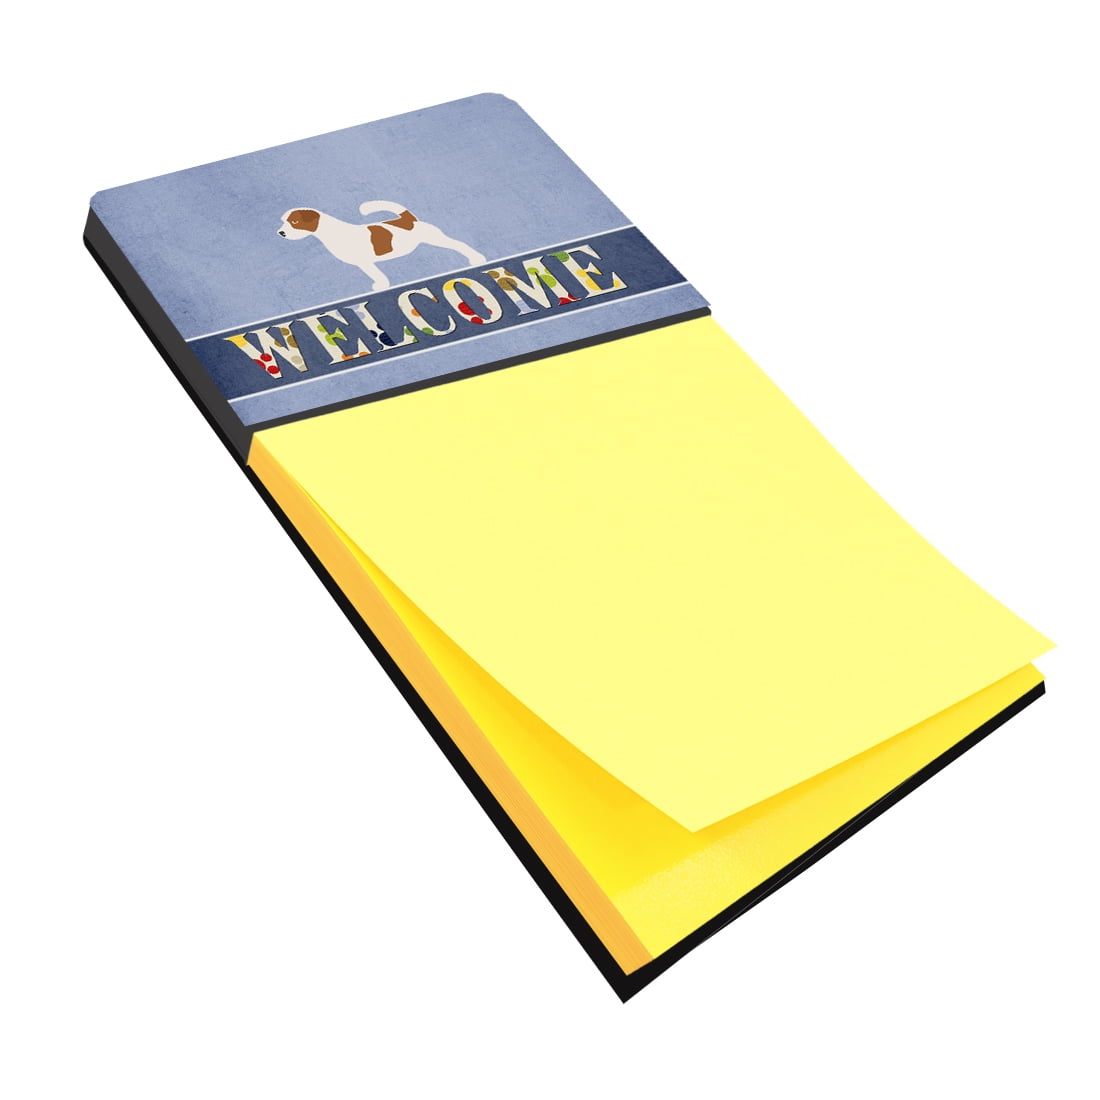 Bb5511sn Jack Russell Terrier Welcome Sticky Note Holder